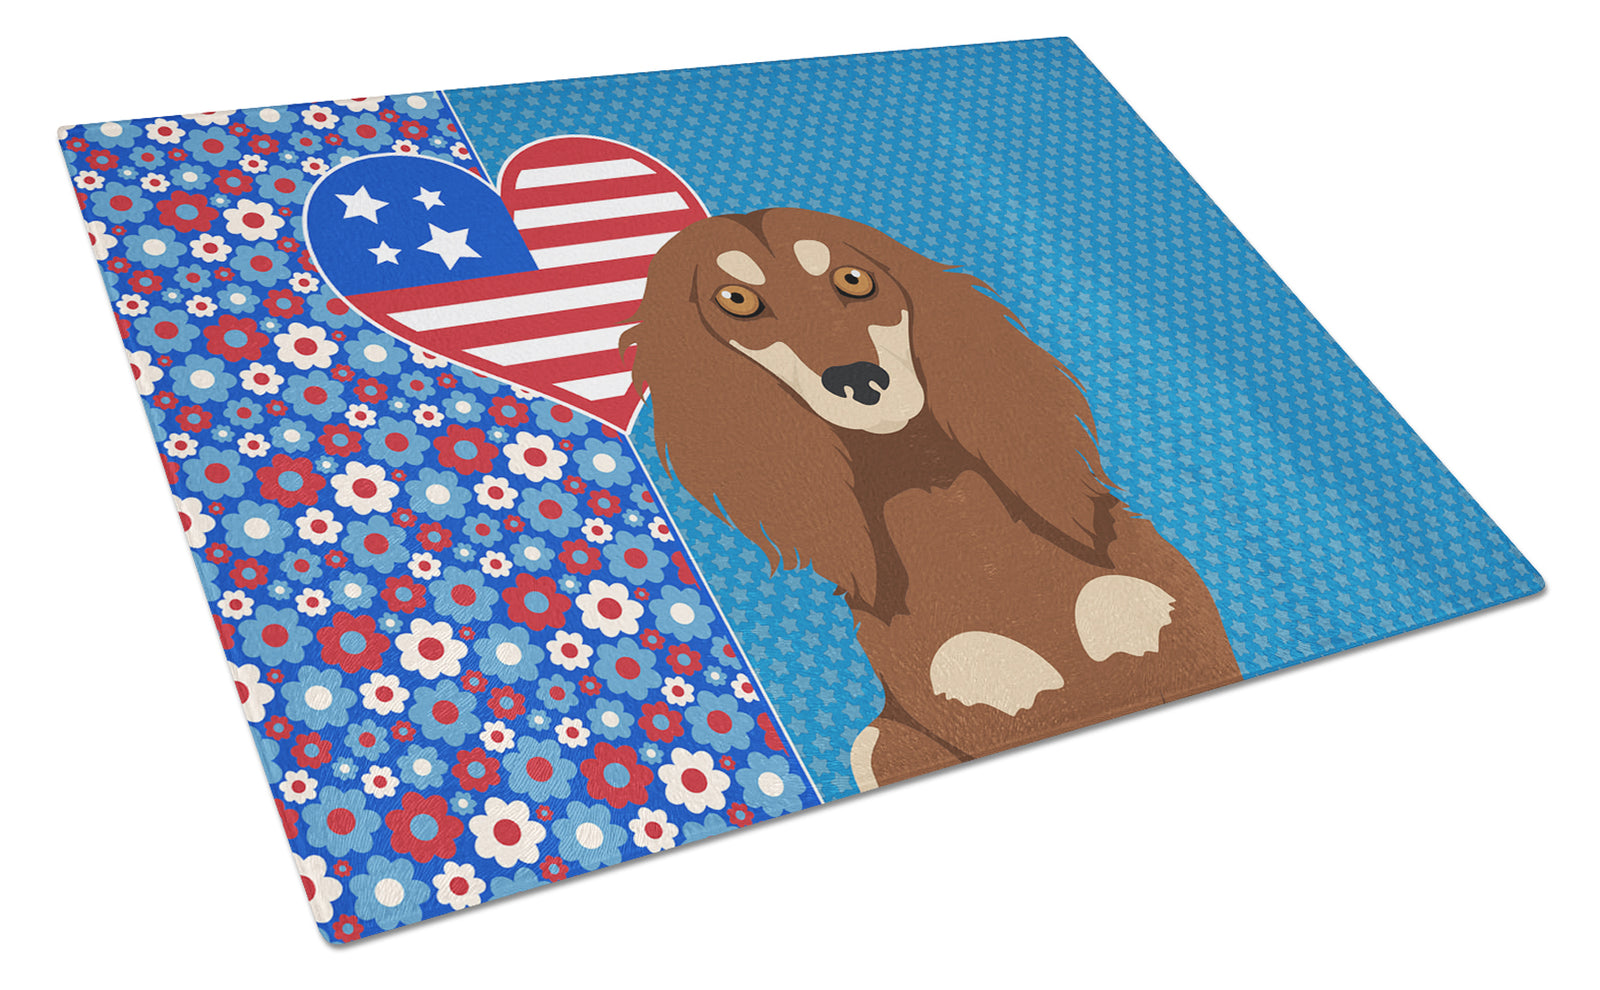 Buy this Longhair Chocolate and Cream Dachshund USA American Glass Cutting Board Large